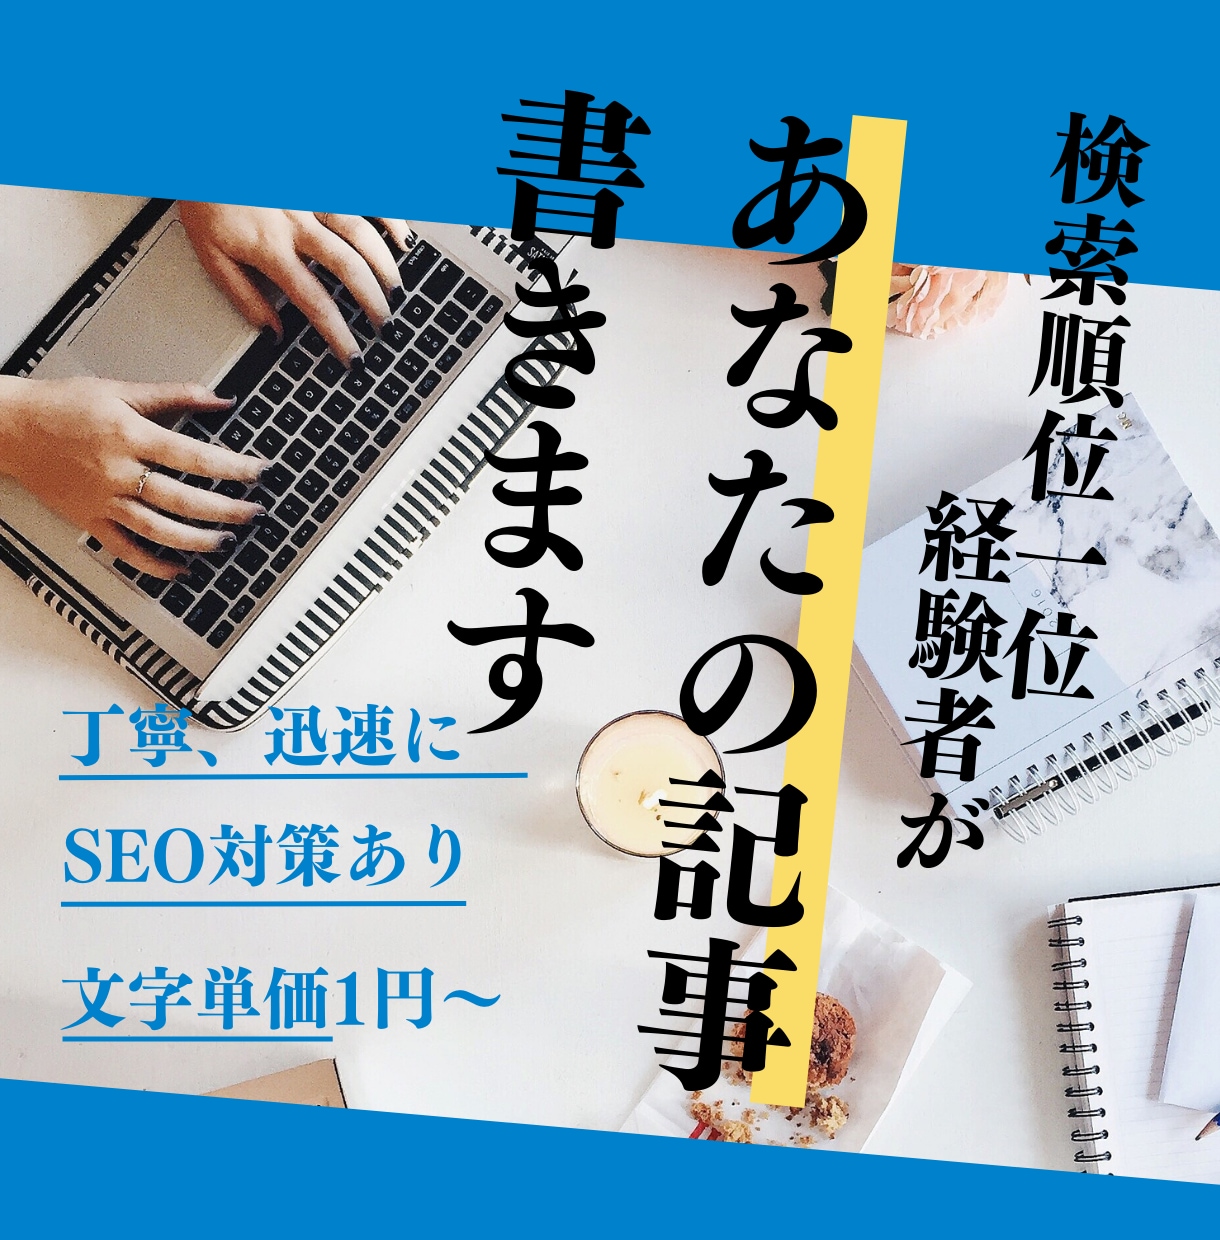 💬Coconara｜An experienced person who ranks first in search will write your article Kazuki Teshima @SEO writer 1…